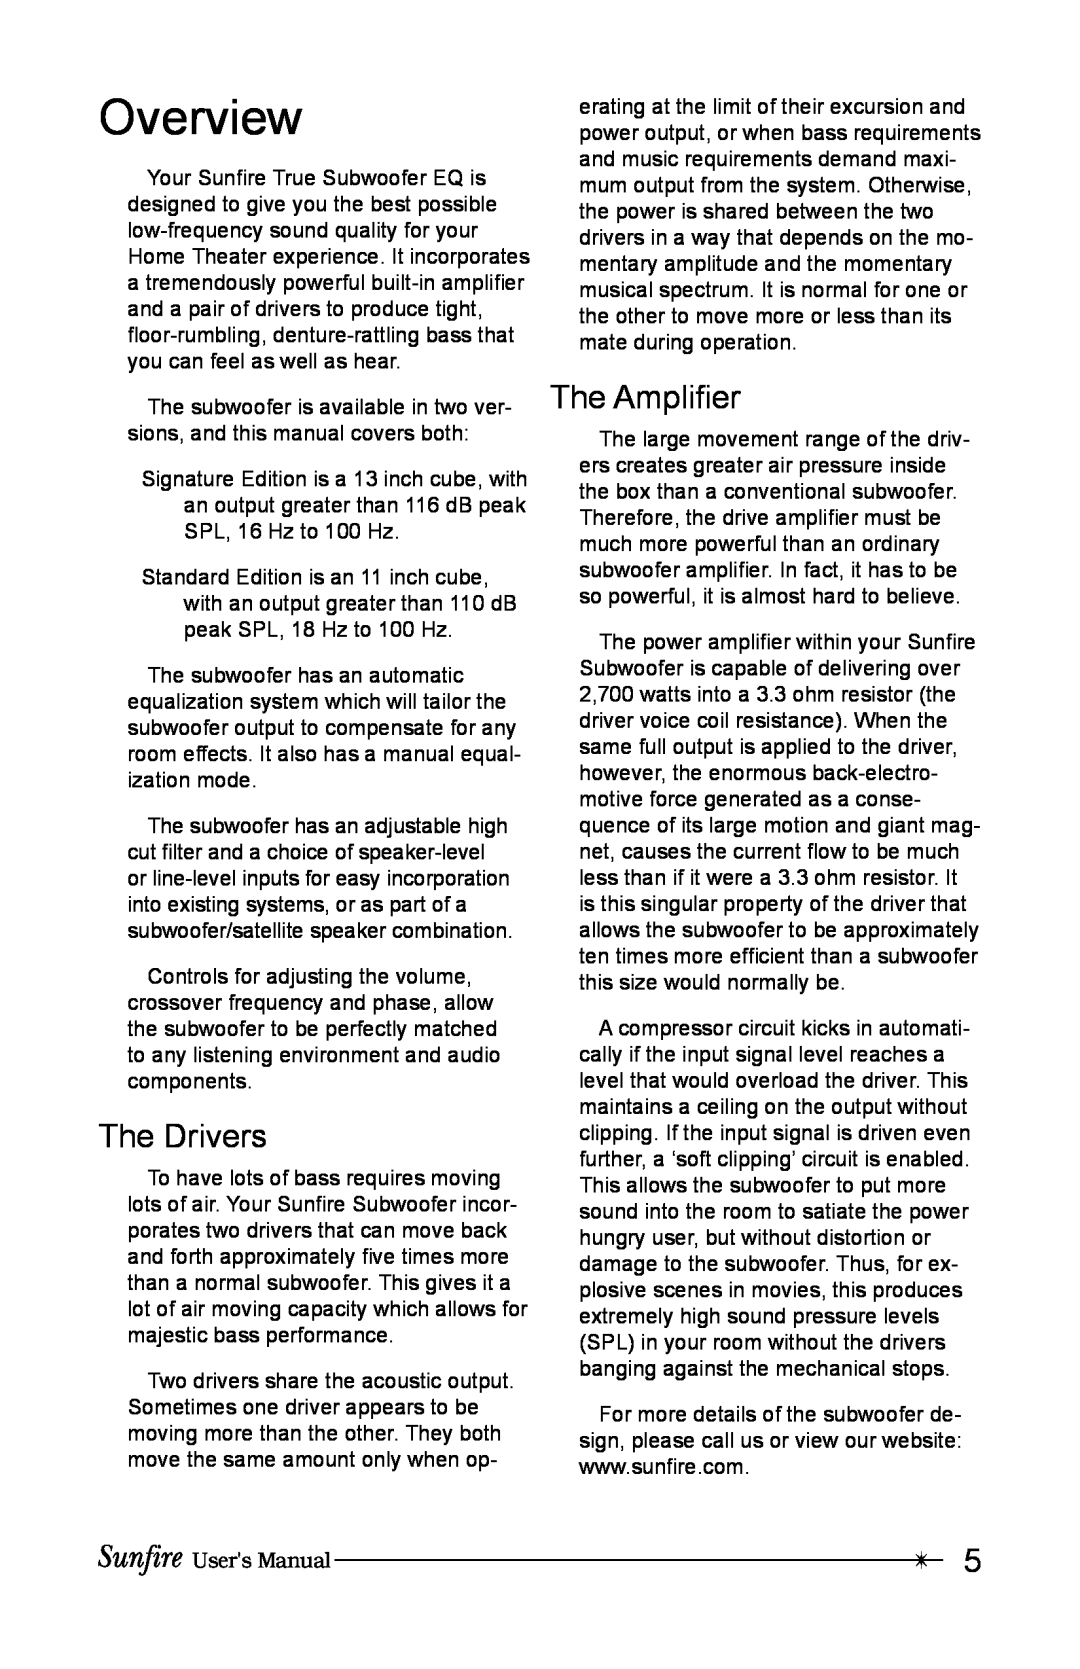 Sunfire True Subwoofer Signature and Standard Version user manual Overview, The Drivers, The AmpliÞer 